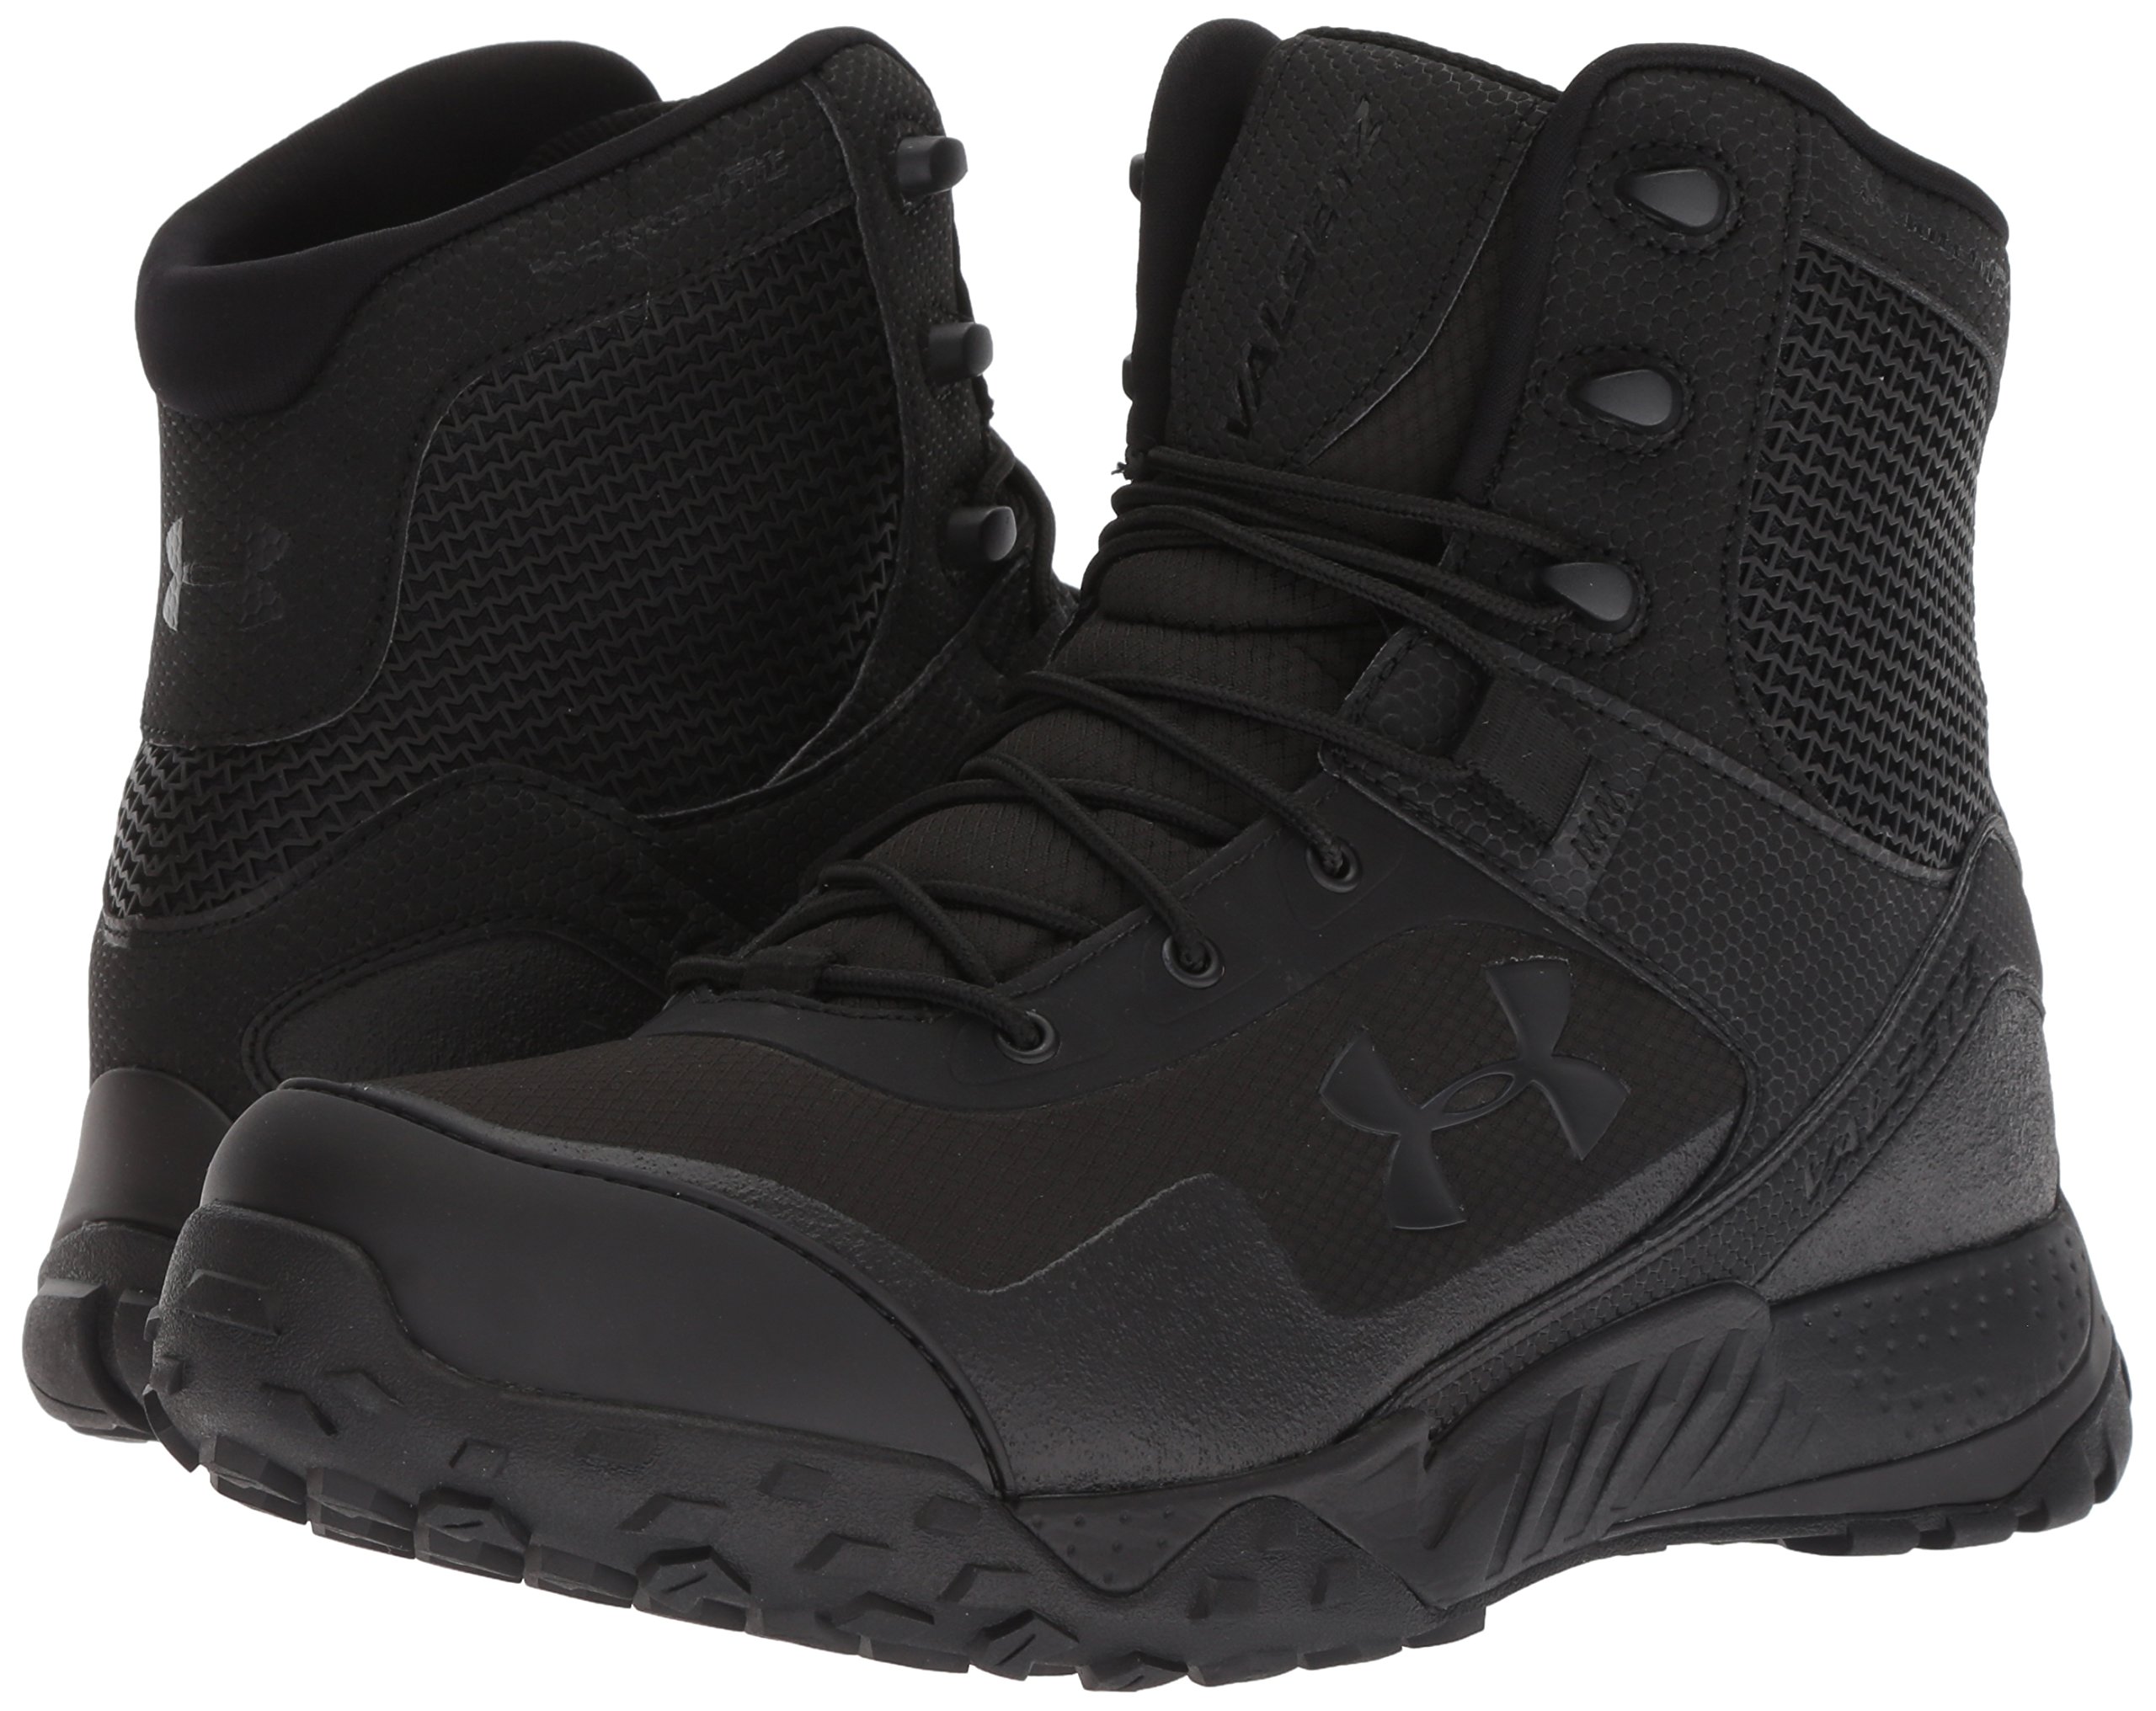 Under Armour Men's Valsetz RTS 1.5 - Wide (4E) Military and Tactical